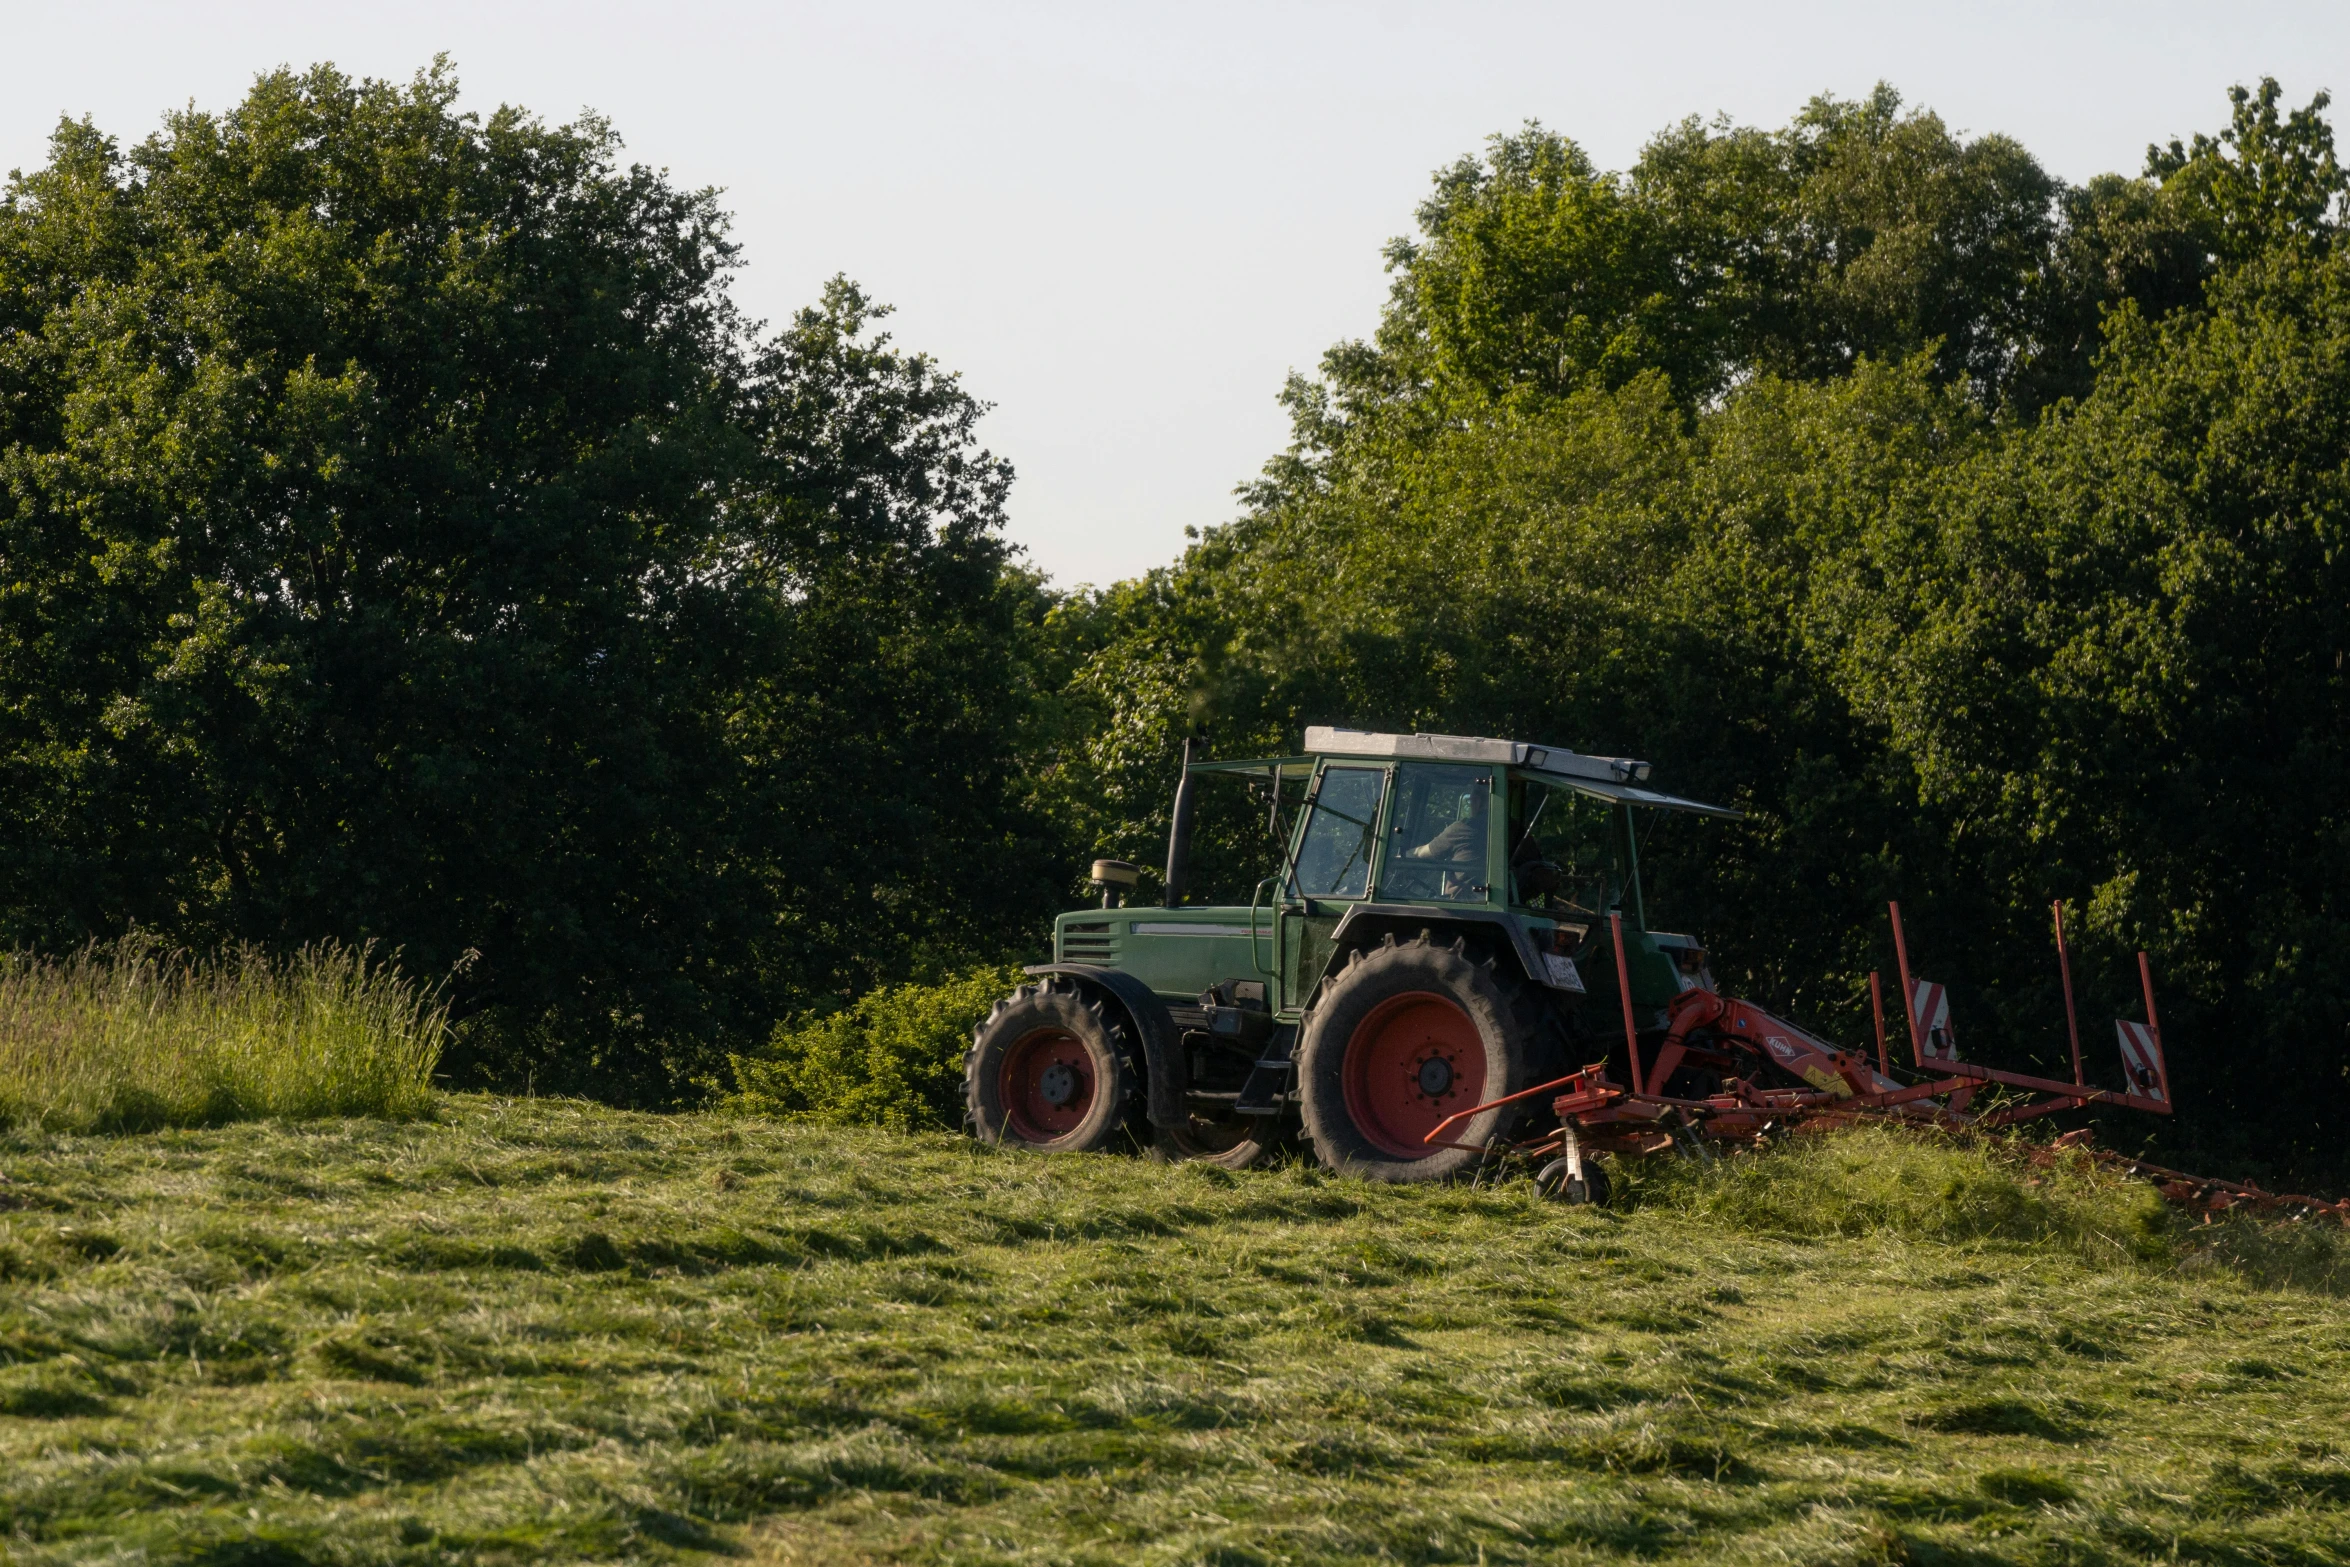 a tractor with a mower attached is parked in a field of grass